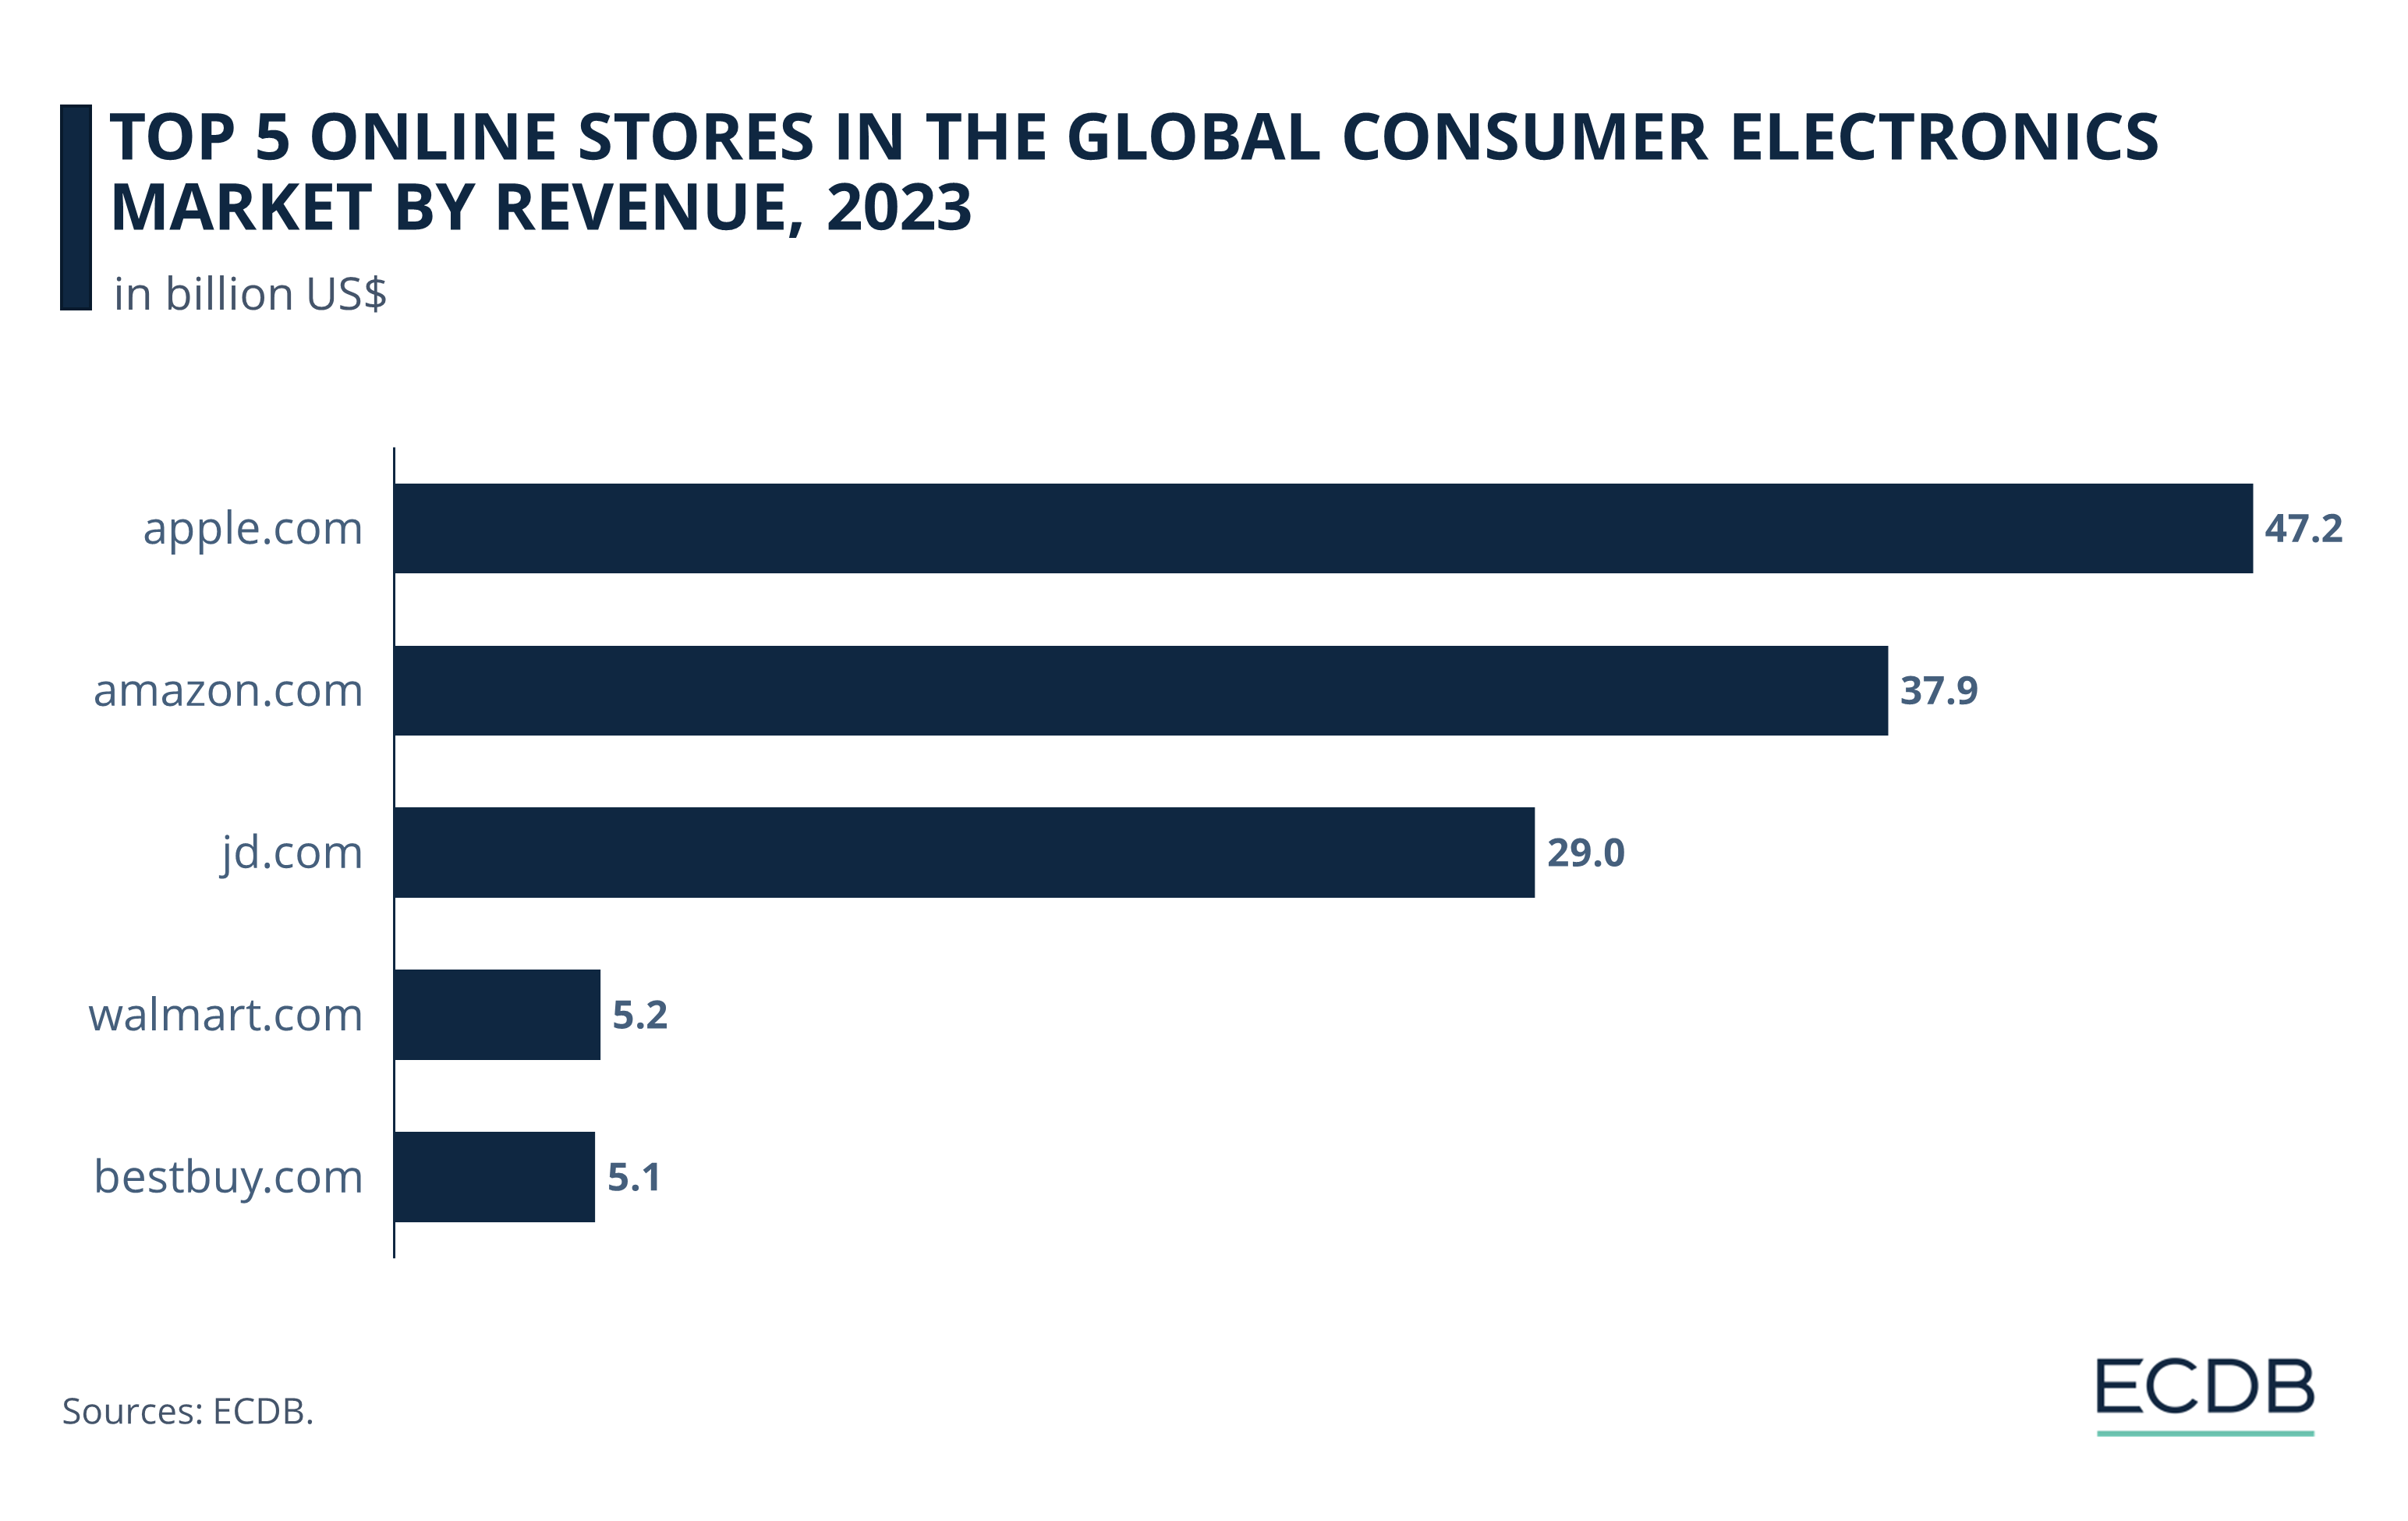 Top 5 Online Stores in the Global Consumer Electronics Market by Revenue, 2023